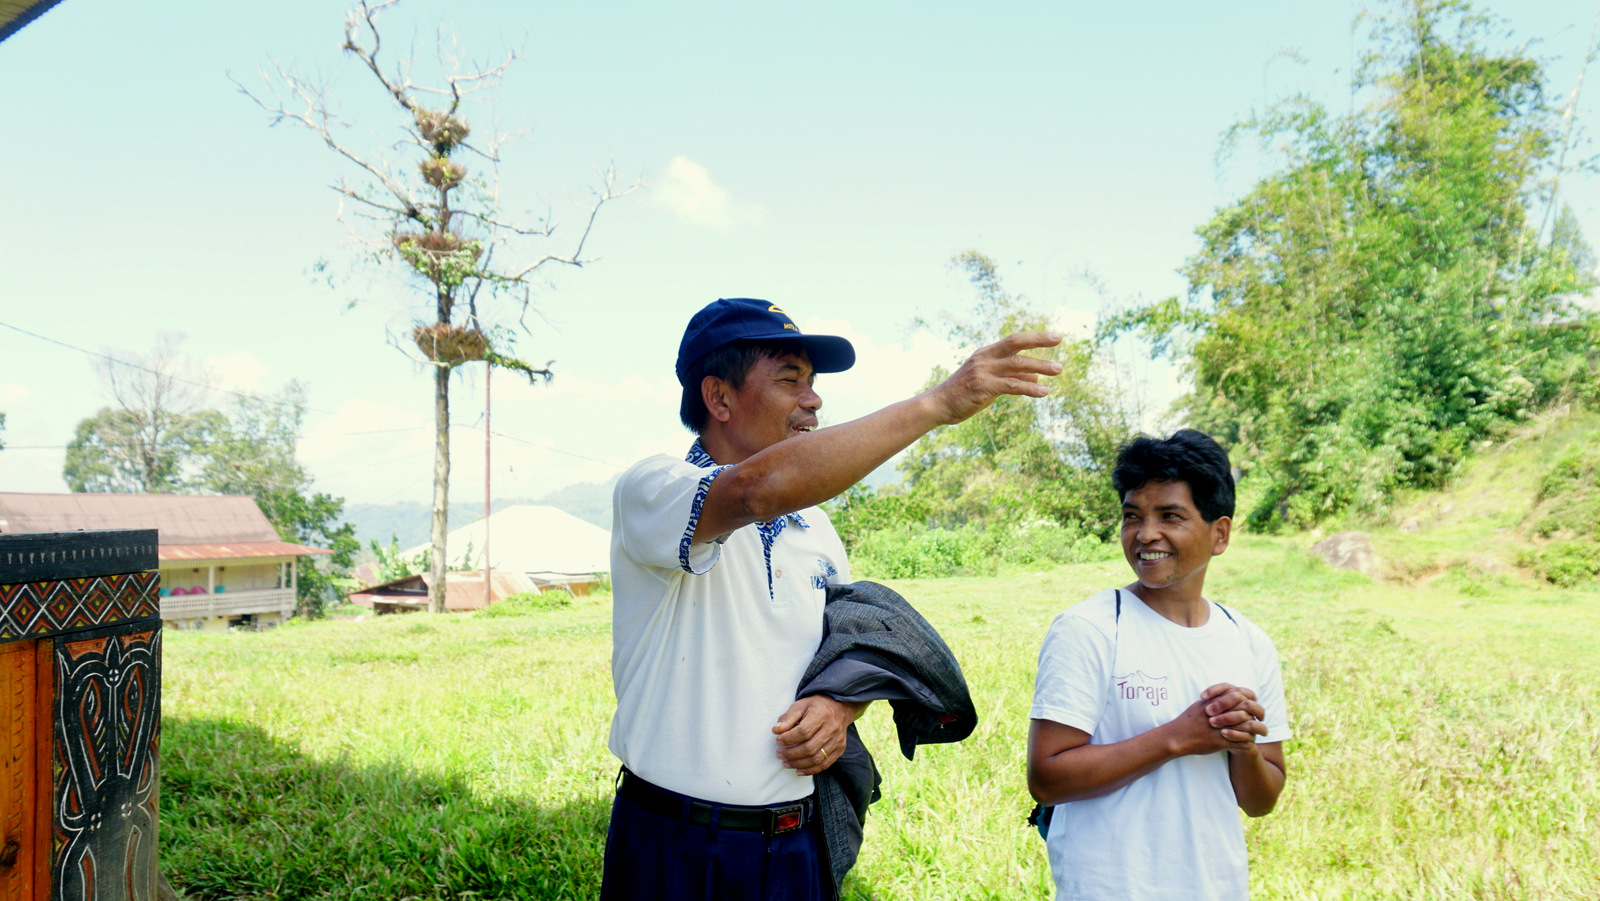 Pak Owen (left), chairman of the Tourism Village Association, and Pak Simone, the association’s treasurer, giving a tour. The association works with Torajamelo to manage tourism to the area. Photo by Upneet Kaur-Nagpal